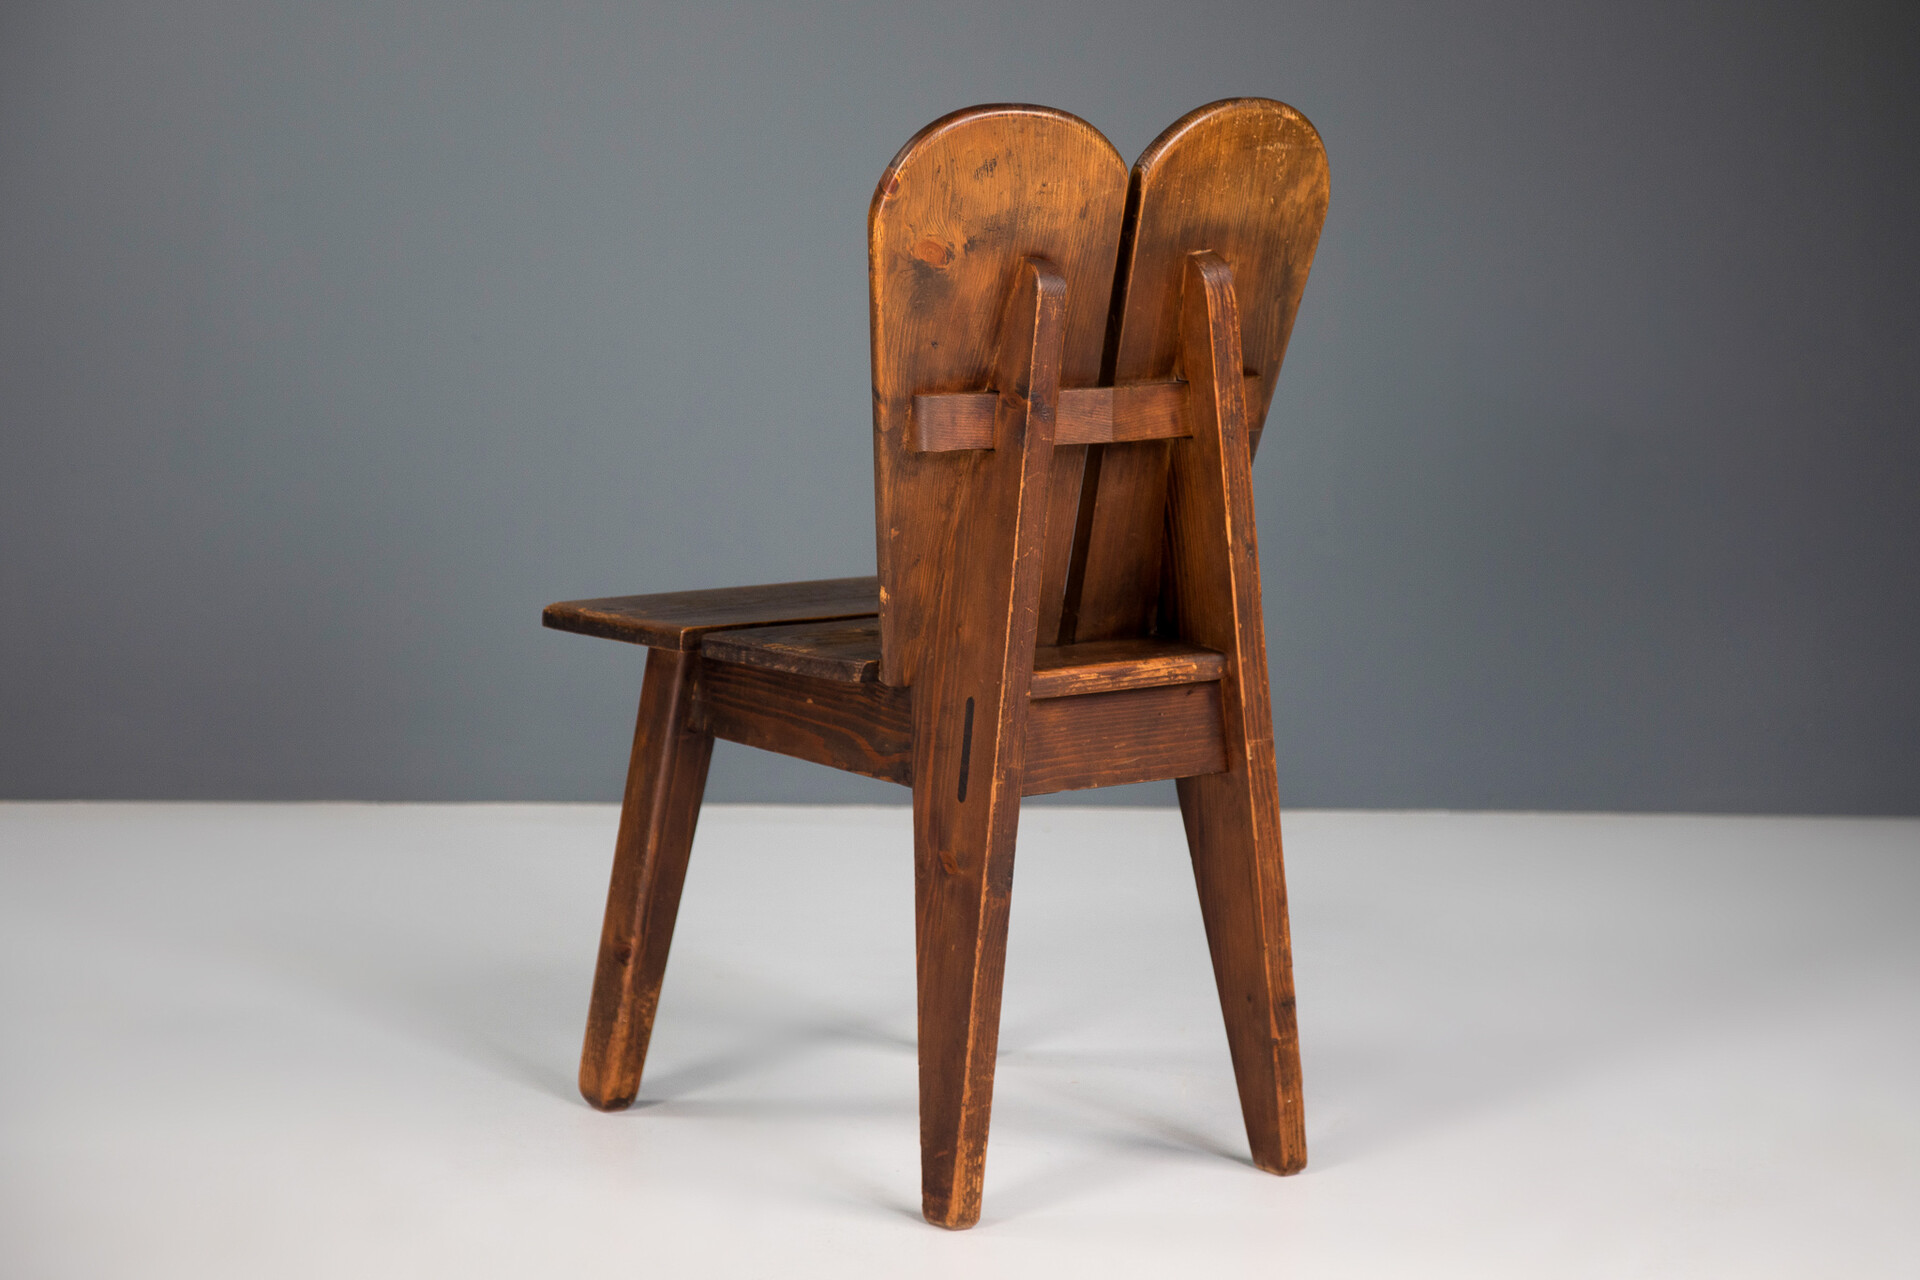 Mid century modern Patinated Pine wood side chairs The Style Of Jean Prouvé , France 1950s Mid-20th century